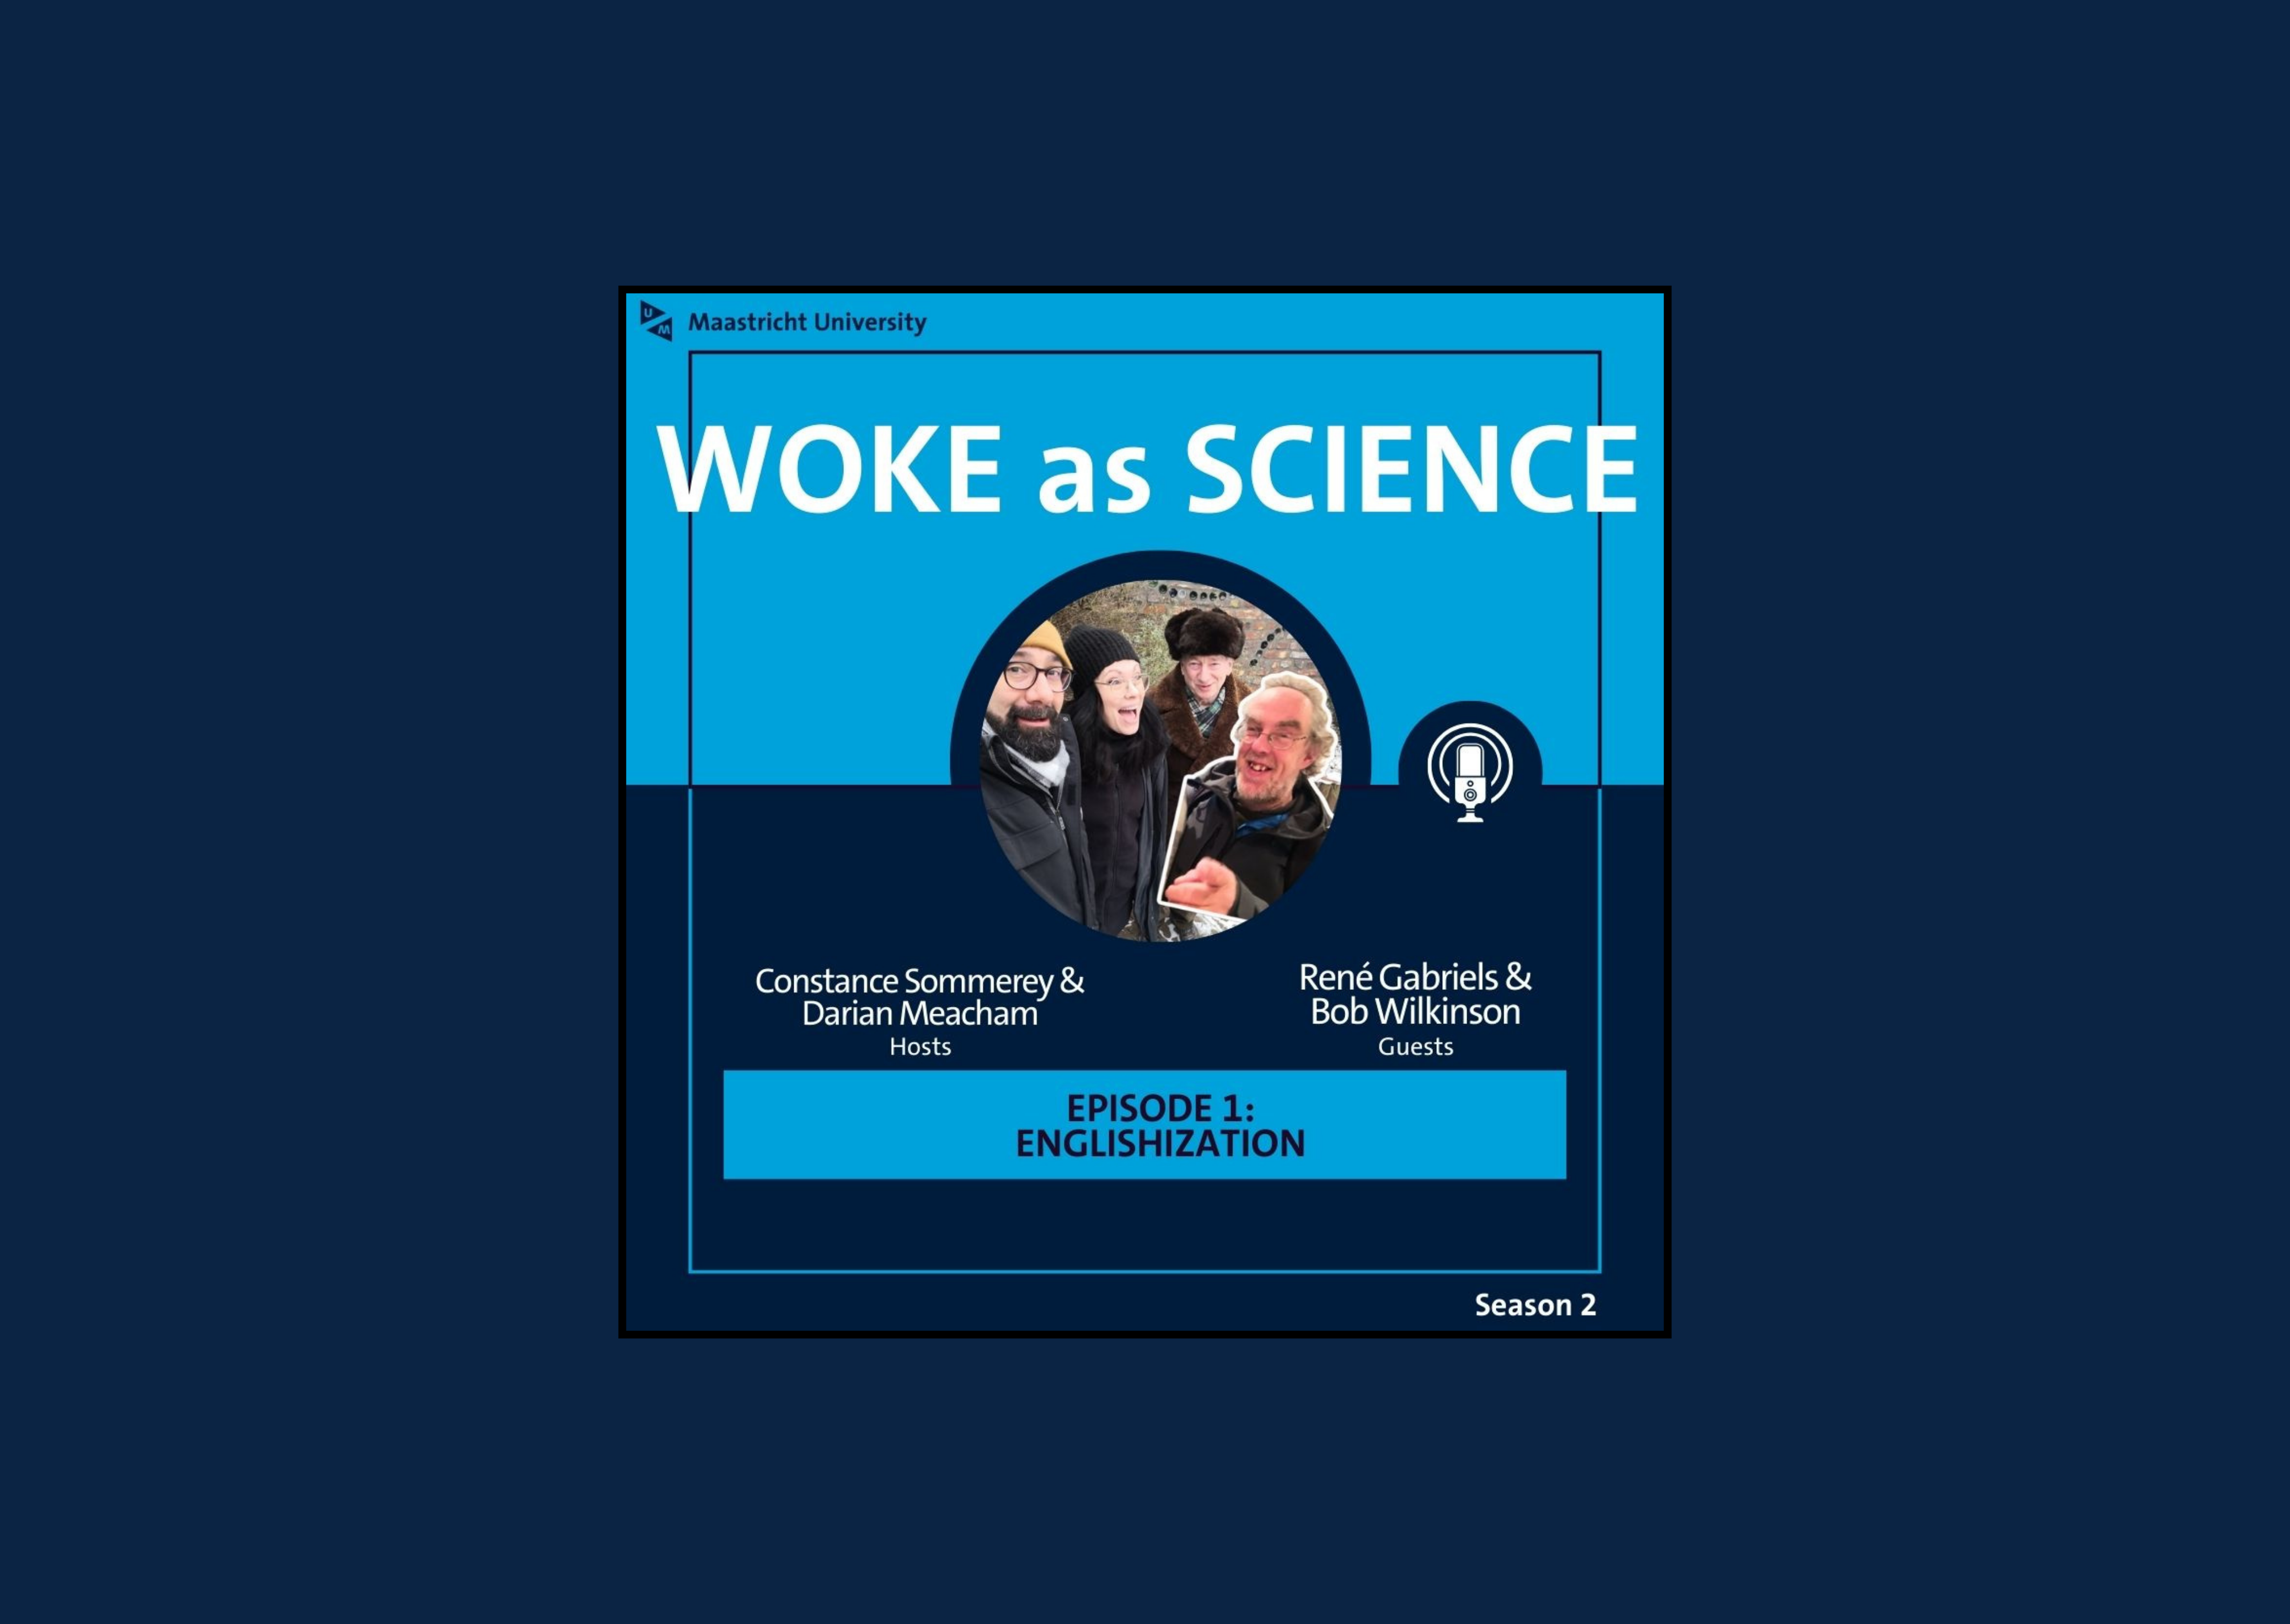 Woke as Science Season 2 Episode 1: Capturing a moment with hosts Constance and Darian alongside esteemed guests Rene Gabriels and Rob Wilkinson.